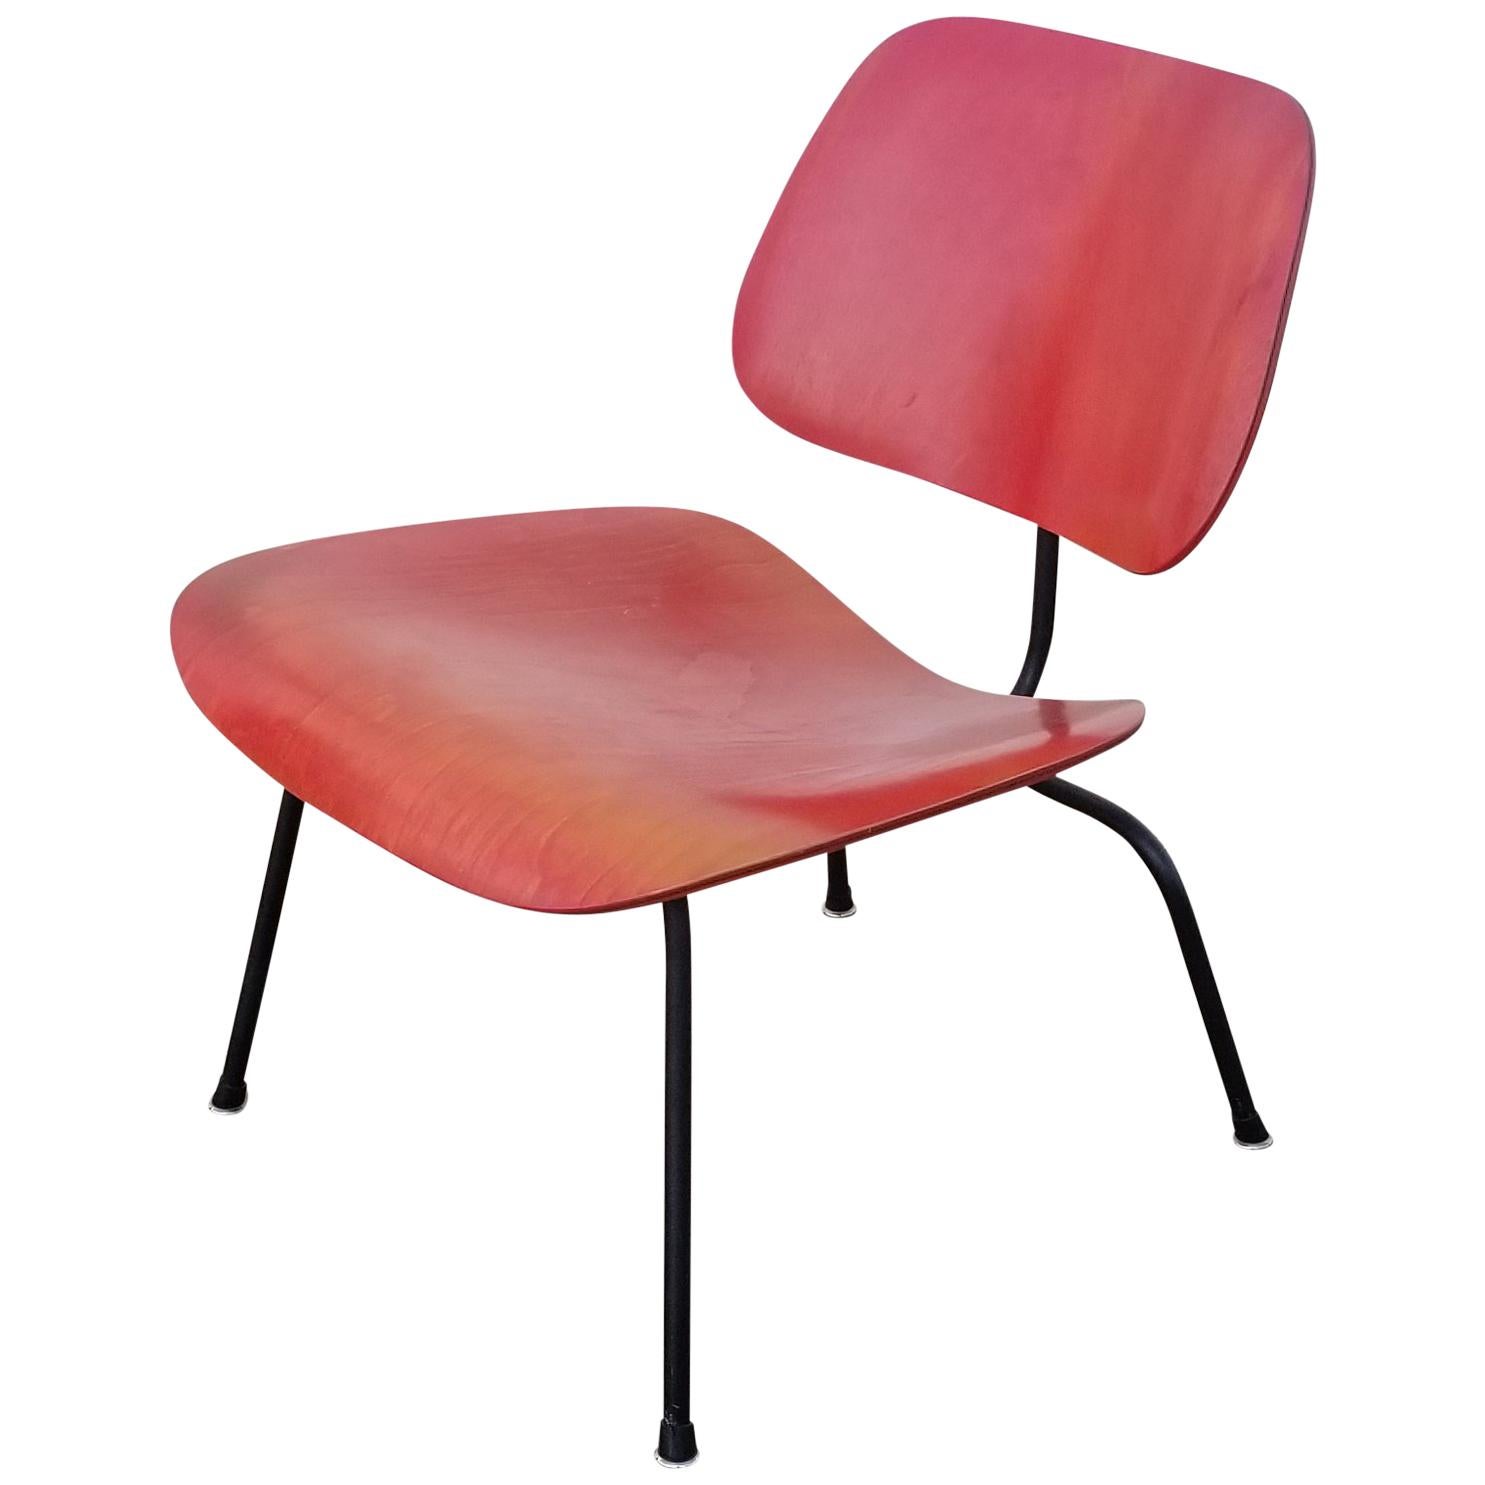 Early LCM Red Aniline Dyed by Charles Eames for Herman Miller